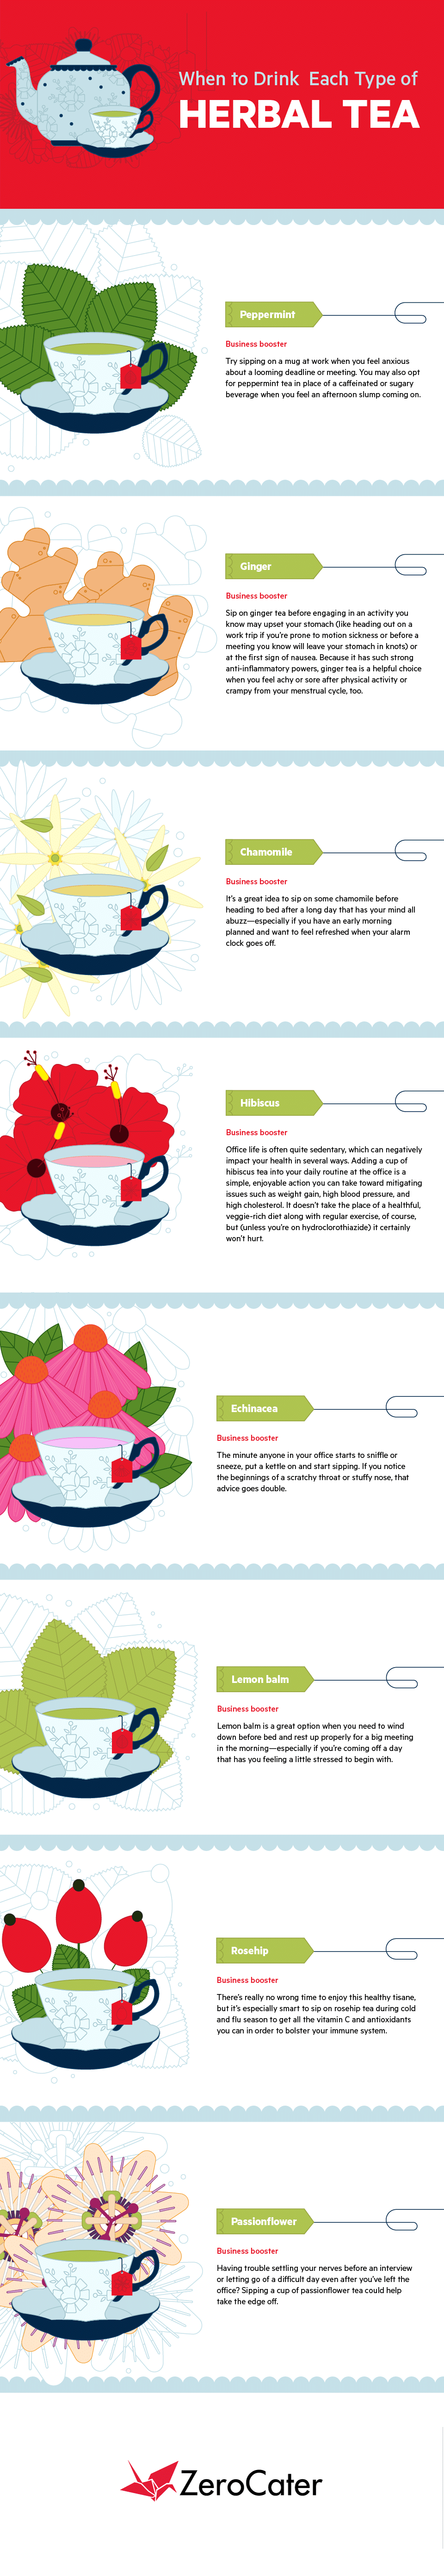 When to Drink Each Type of Herbal Tea